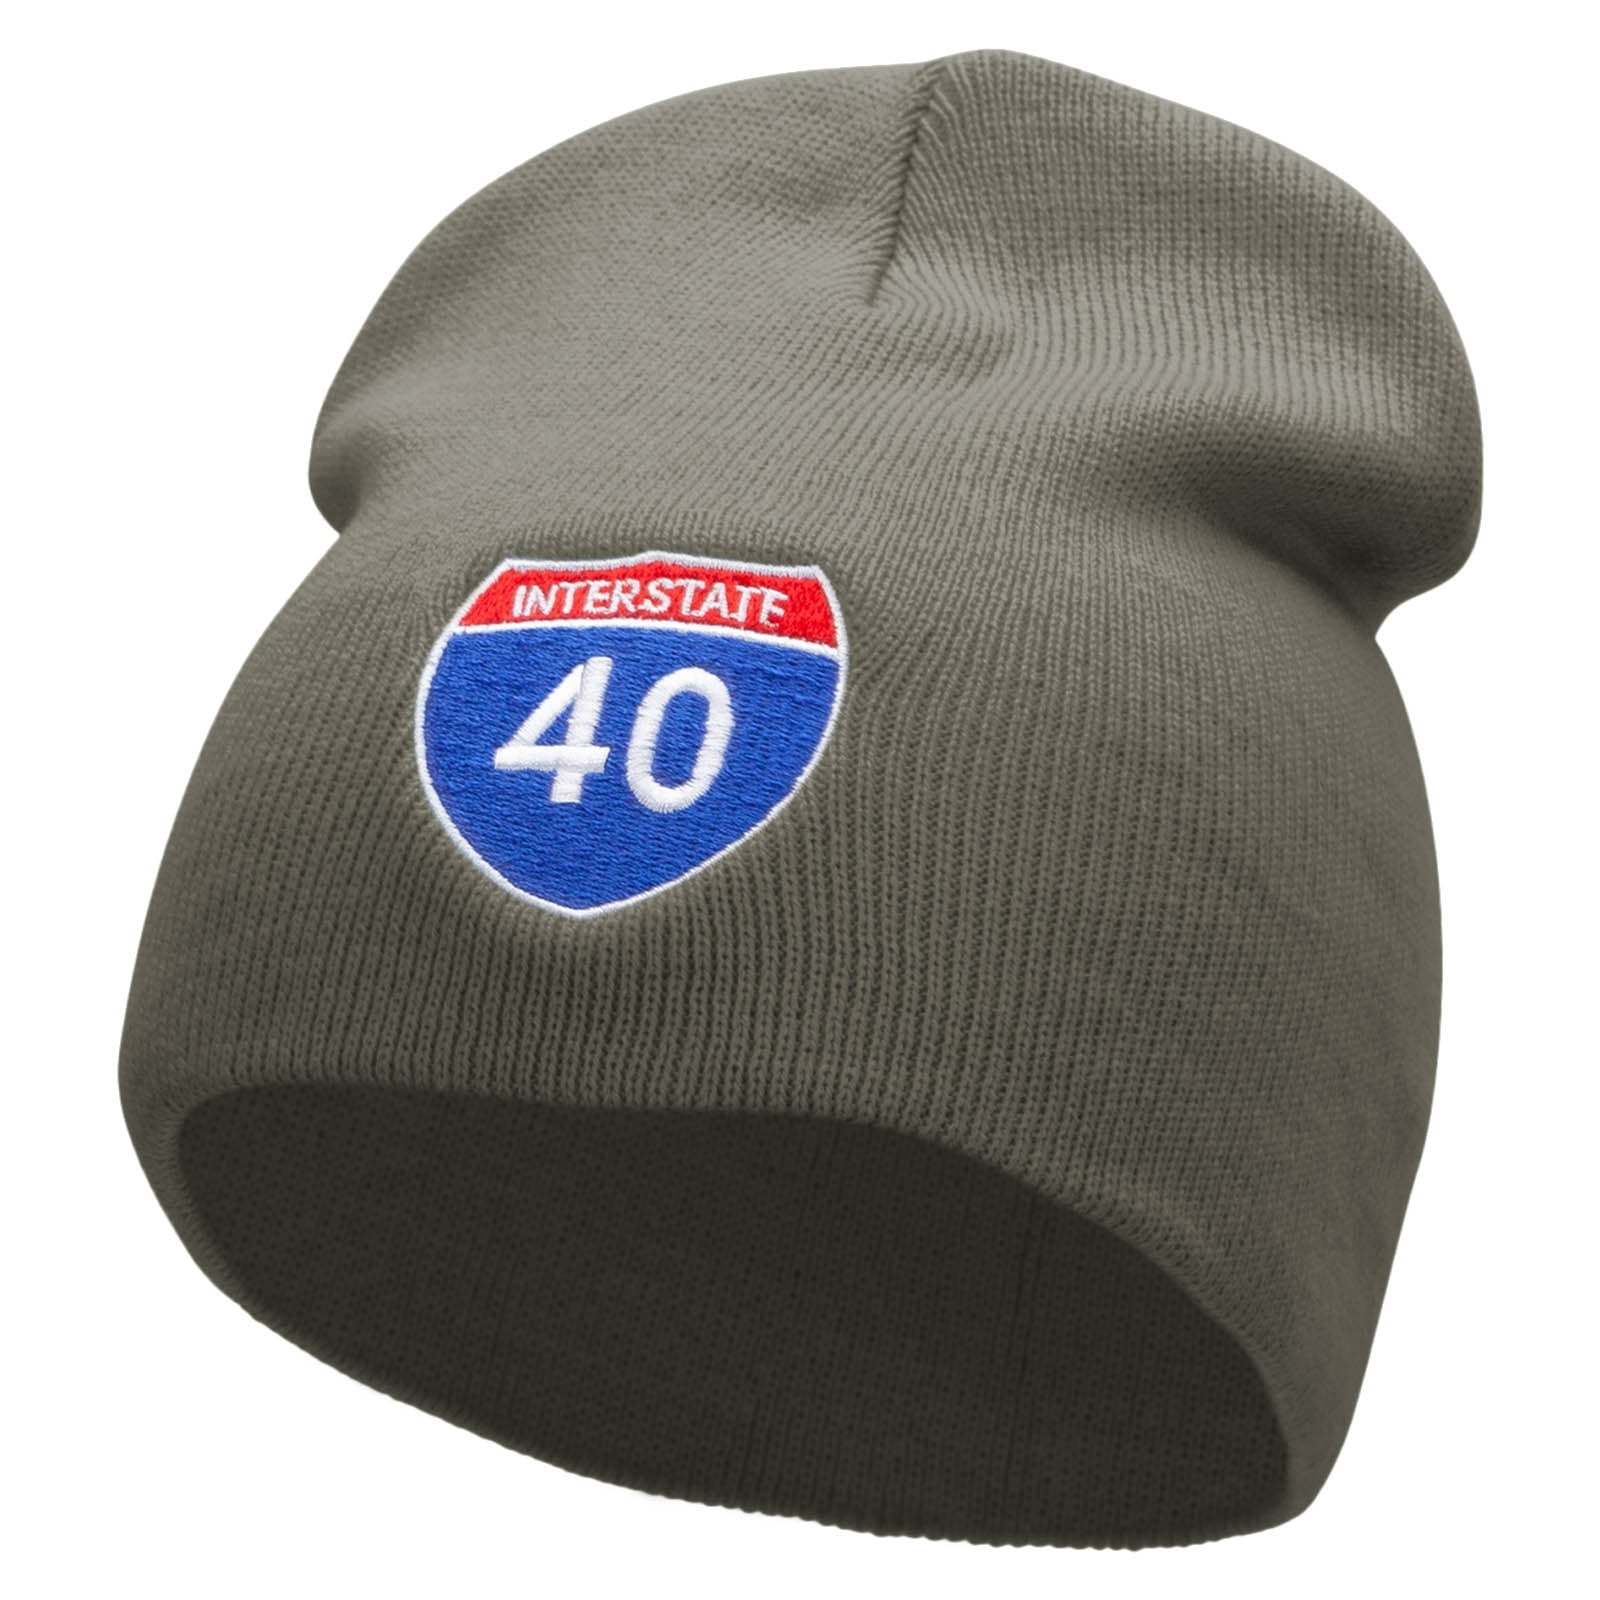 Interstate Highway 40 Sign Embroidered 8 inch Acrylic Short Blank Beanie - Grey OSFM